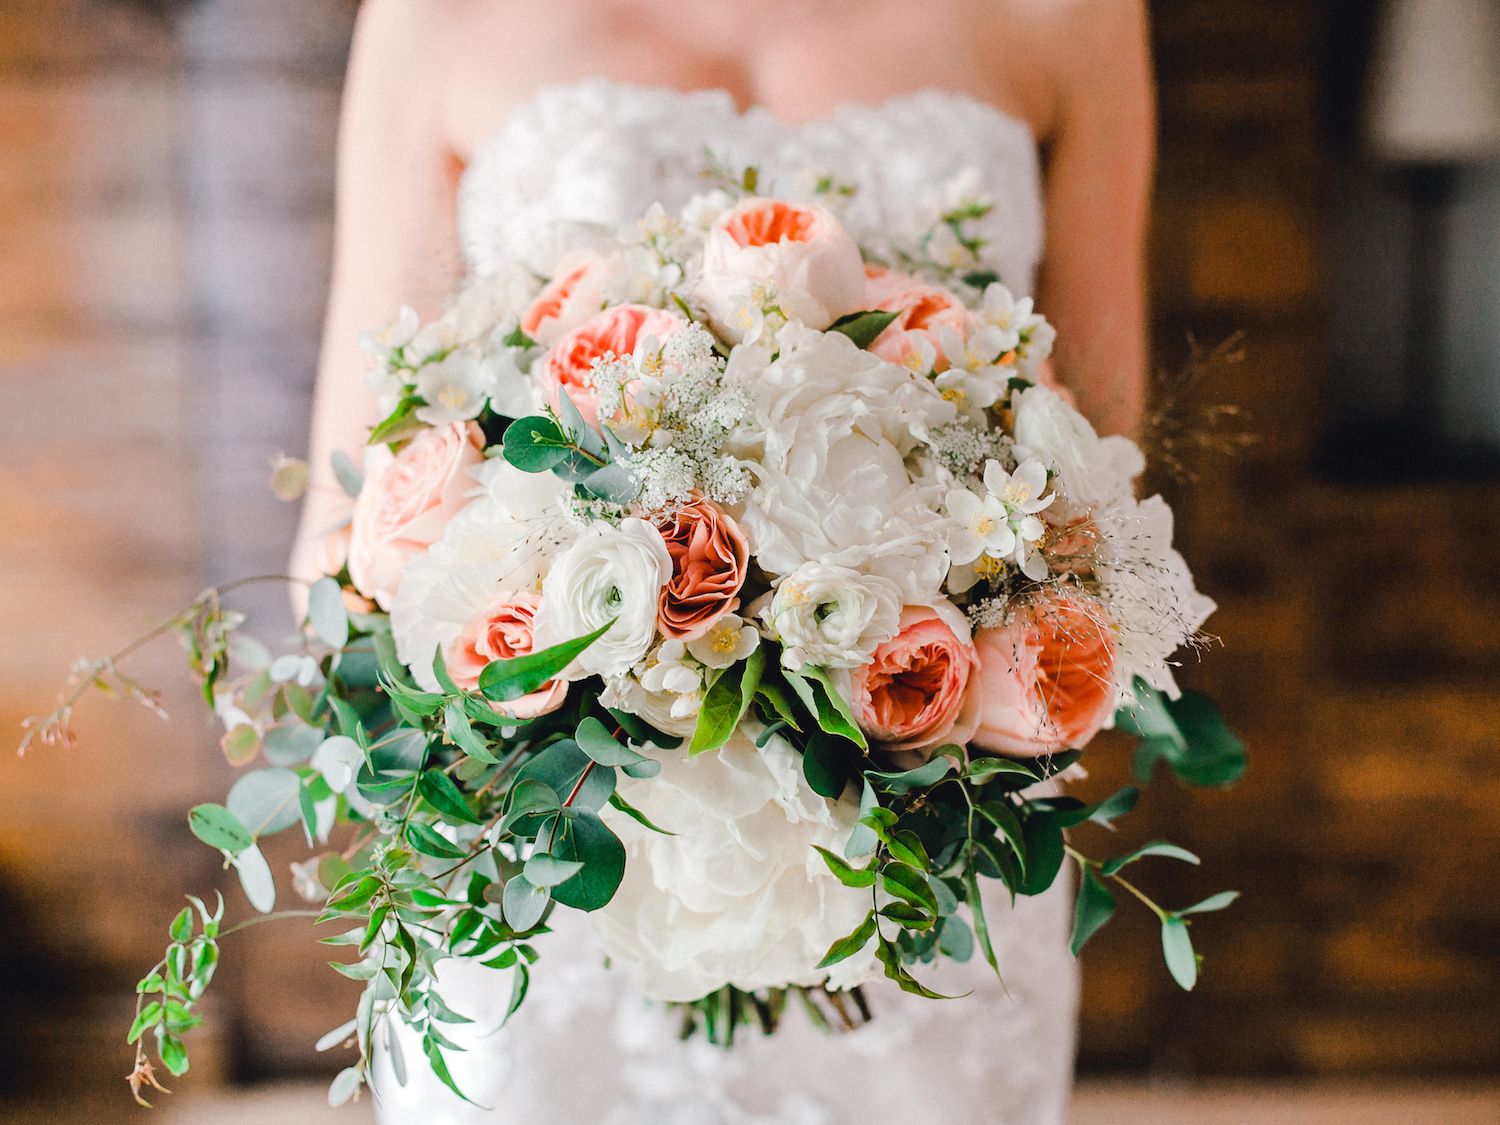 Bride's bouquet with garden roses, peonies, and hydrangeas for a summer wedding